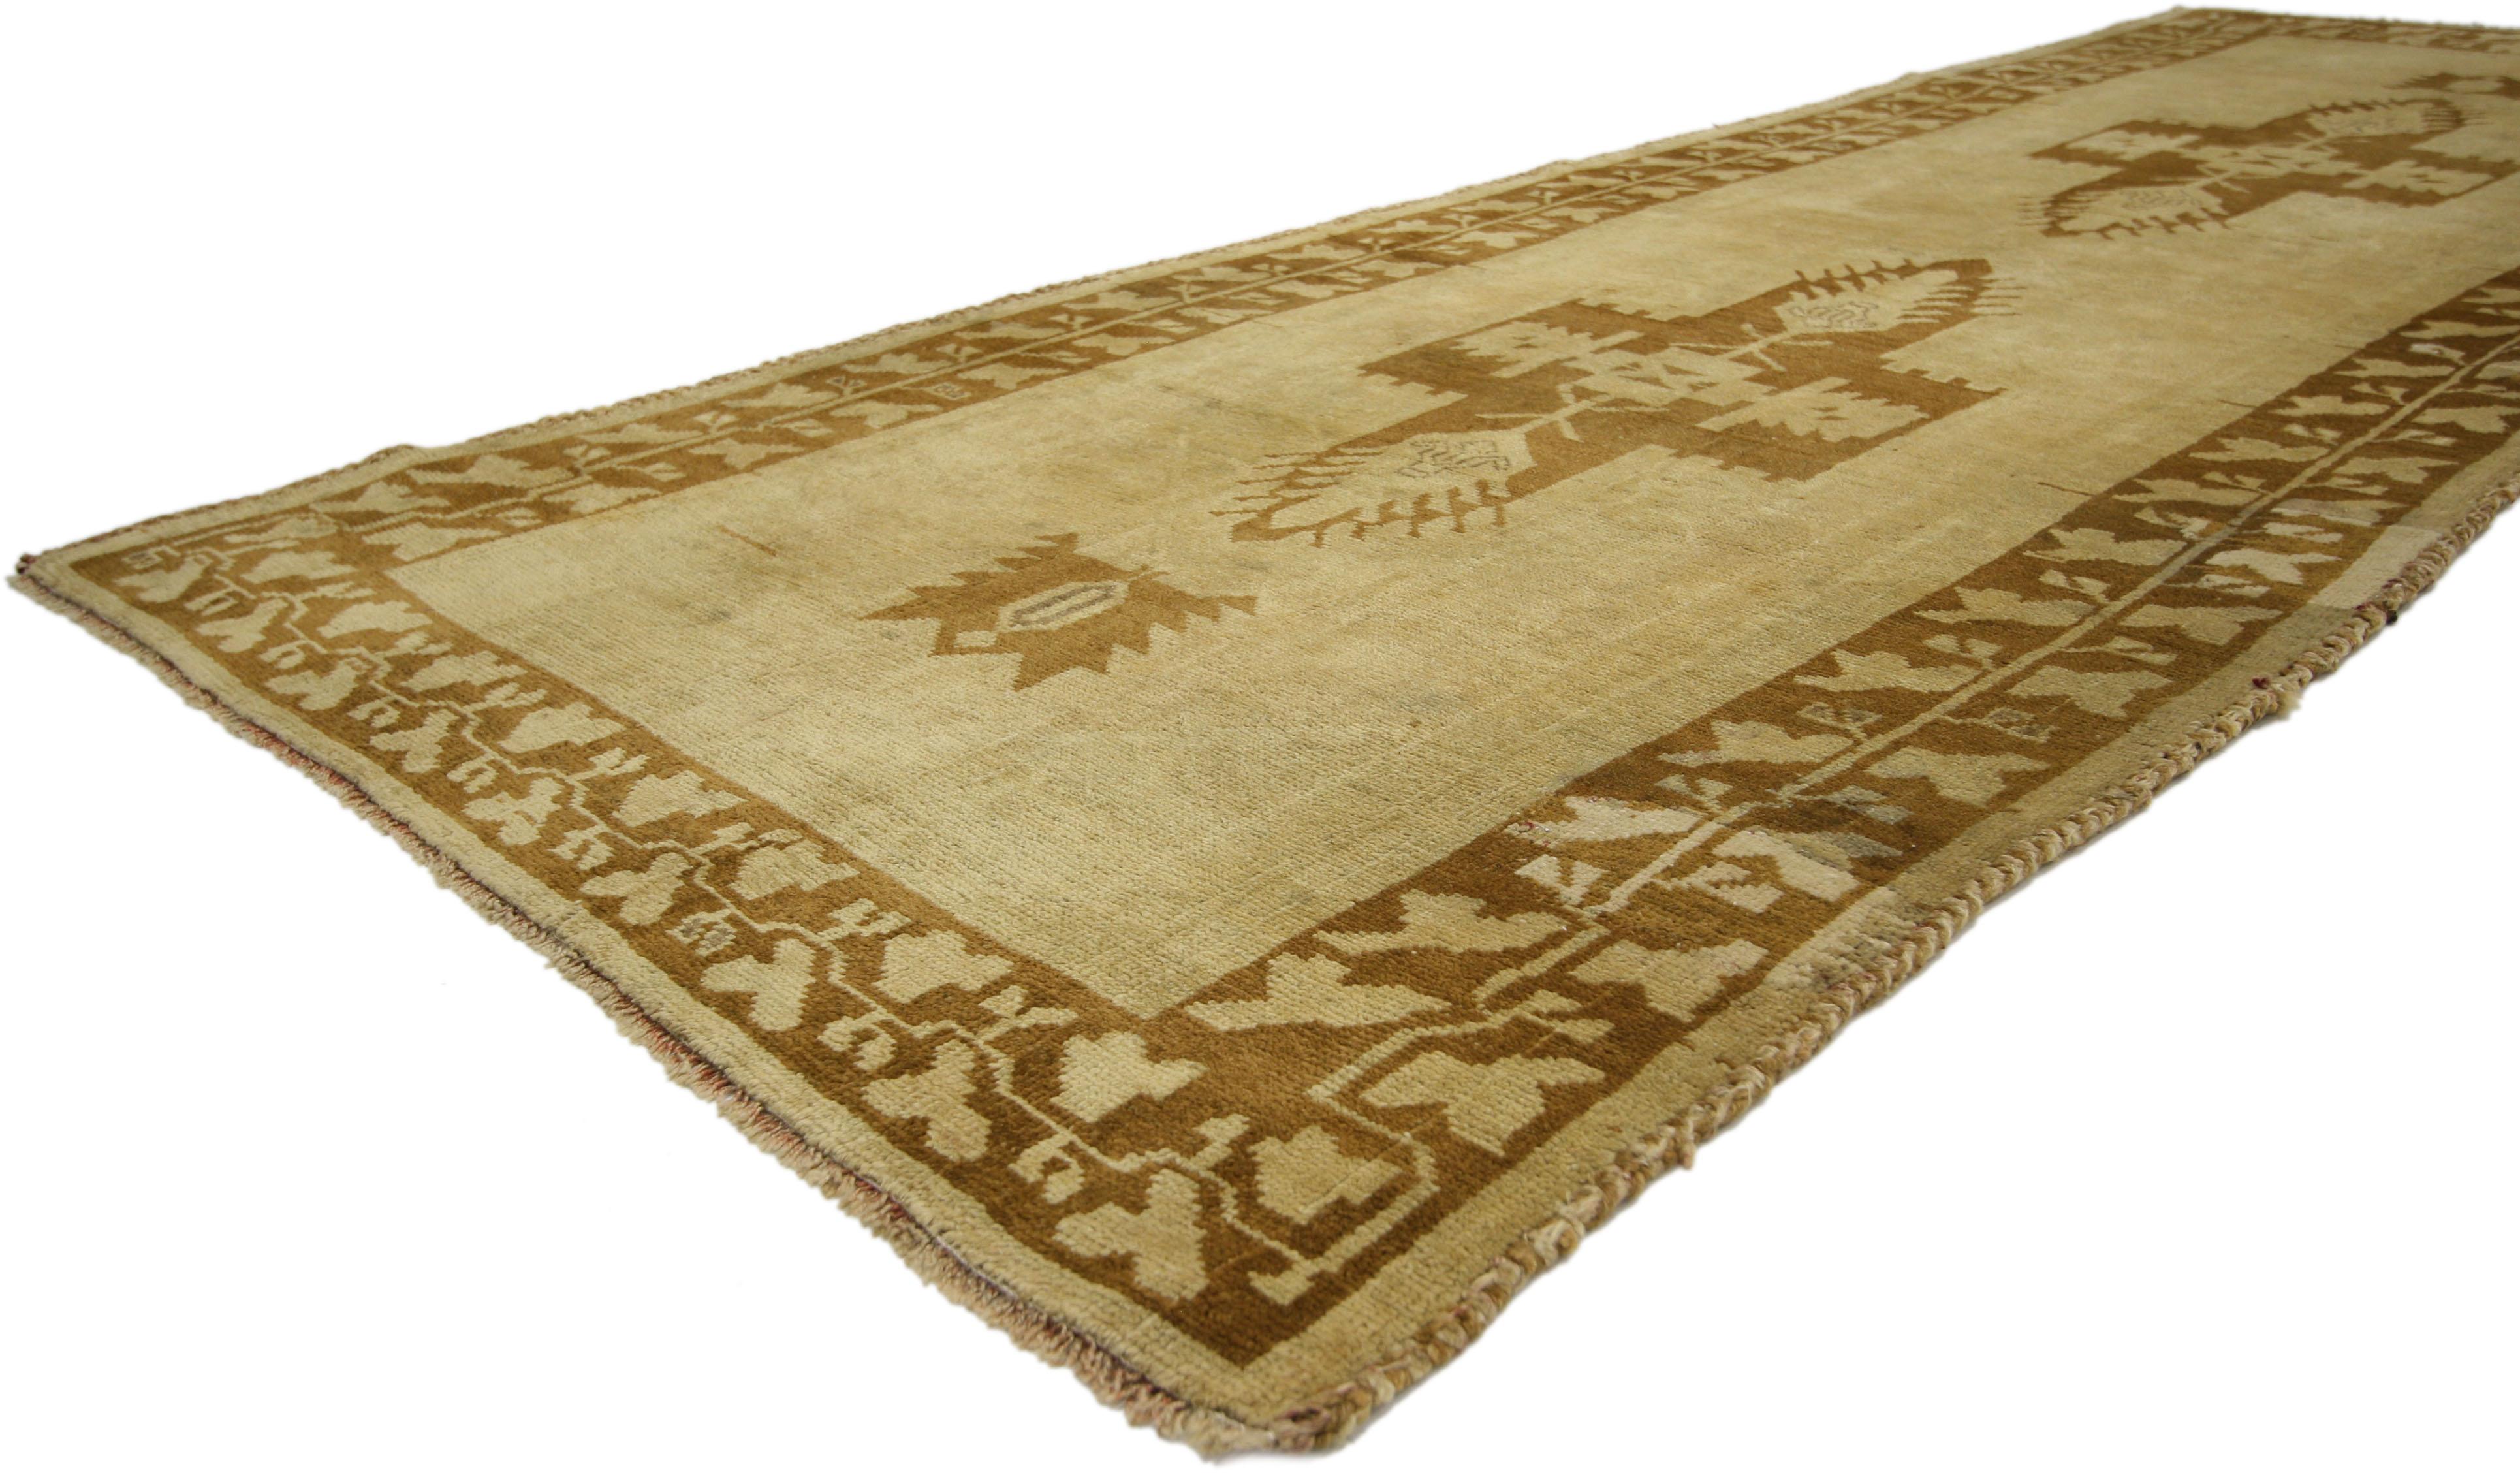 50023 Vintage Turkish Oushak Runner with Warm, Neutral Colors, Hallway Runner. Hand-knotted from soft, silky wool and featuring low-contrast warm colors, this vintage Turkish Oushak carpet runner is easily integrated into modern and Minimalist homes